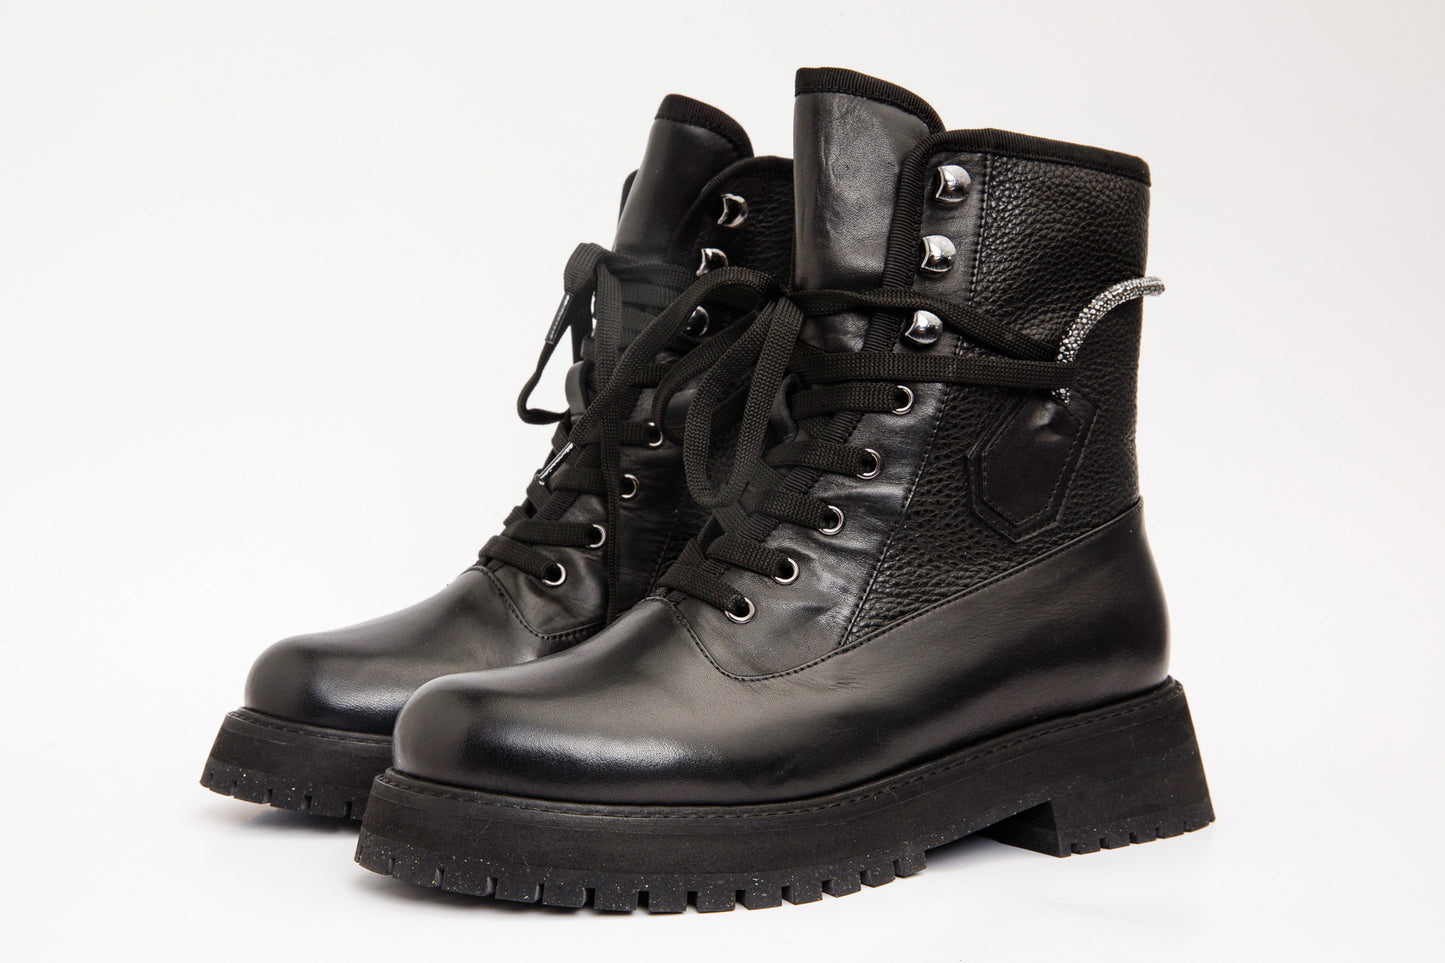 The Arata Black Leather Lace-Up Ankle Women Boot With a Side Zipper